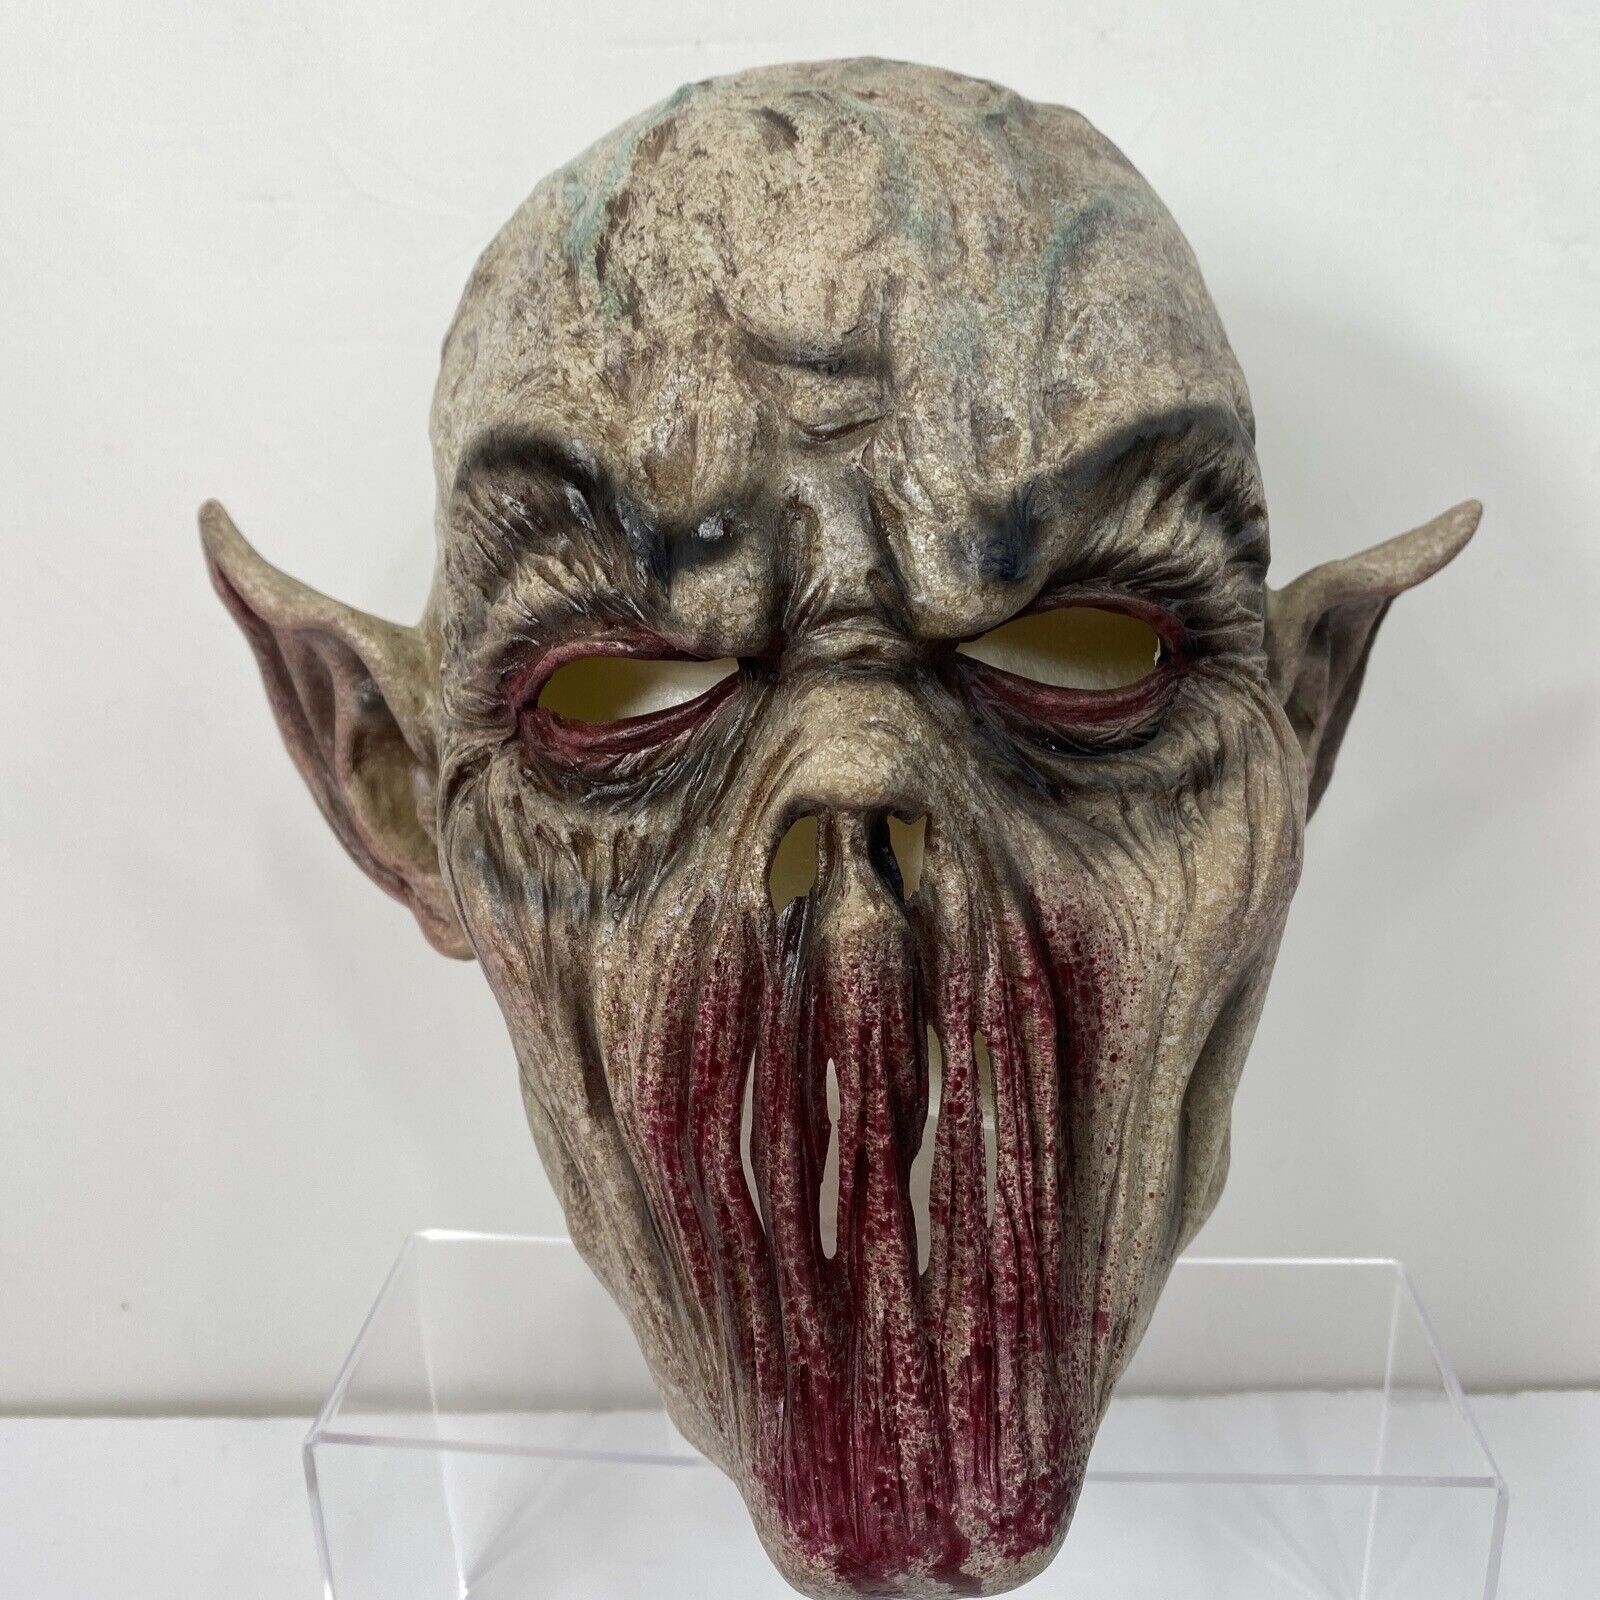 Scary Bloody Zombie Mask Costume Demon Adult Monster Halloween Cosplay Latex 